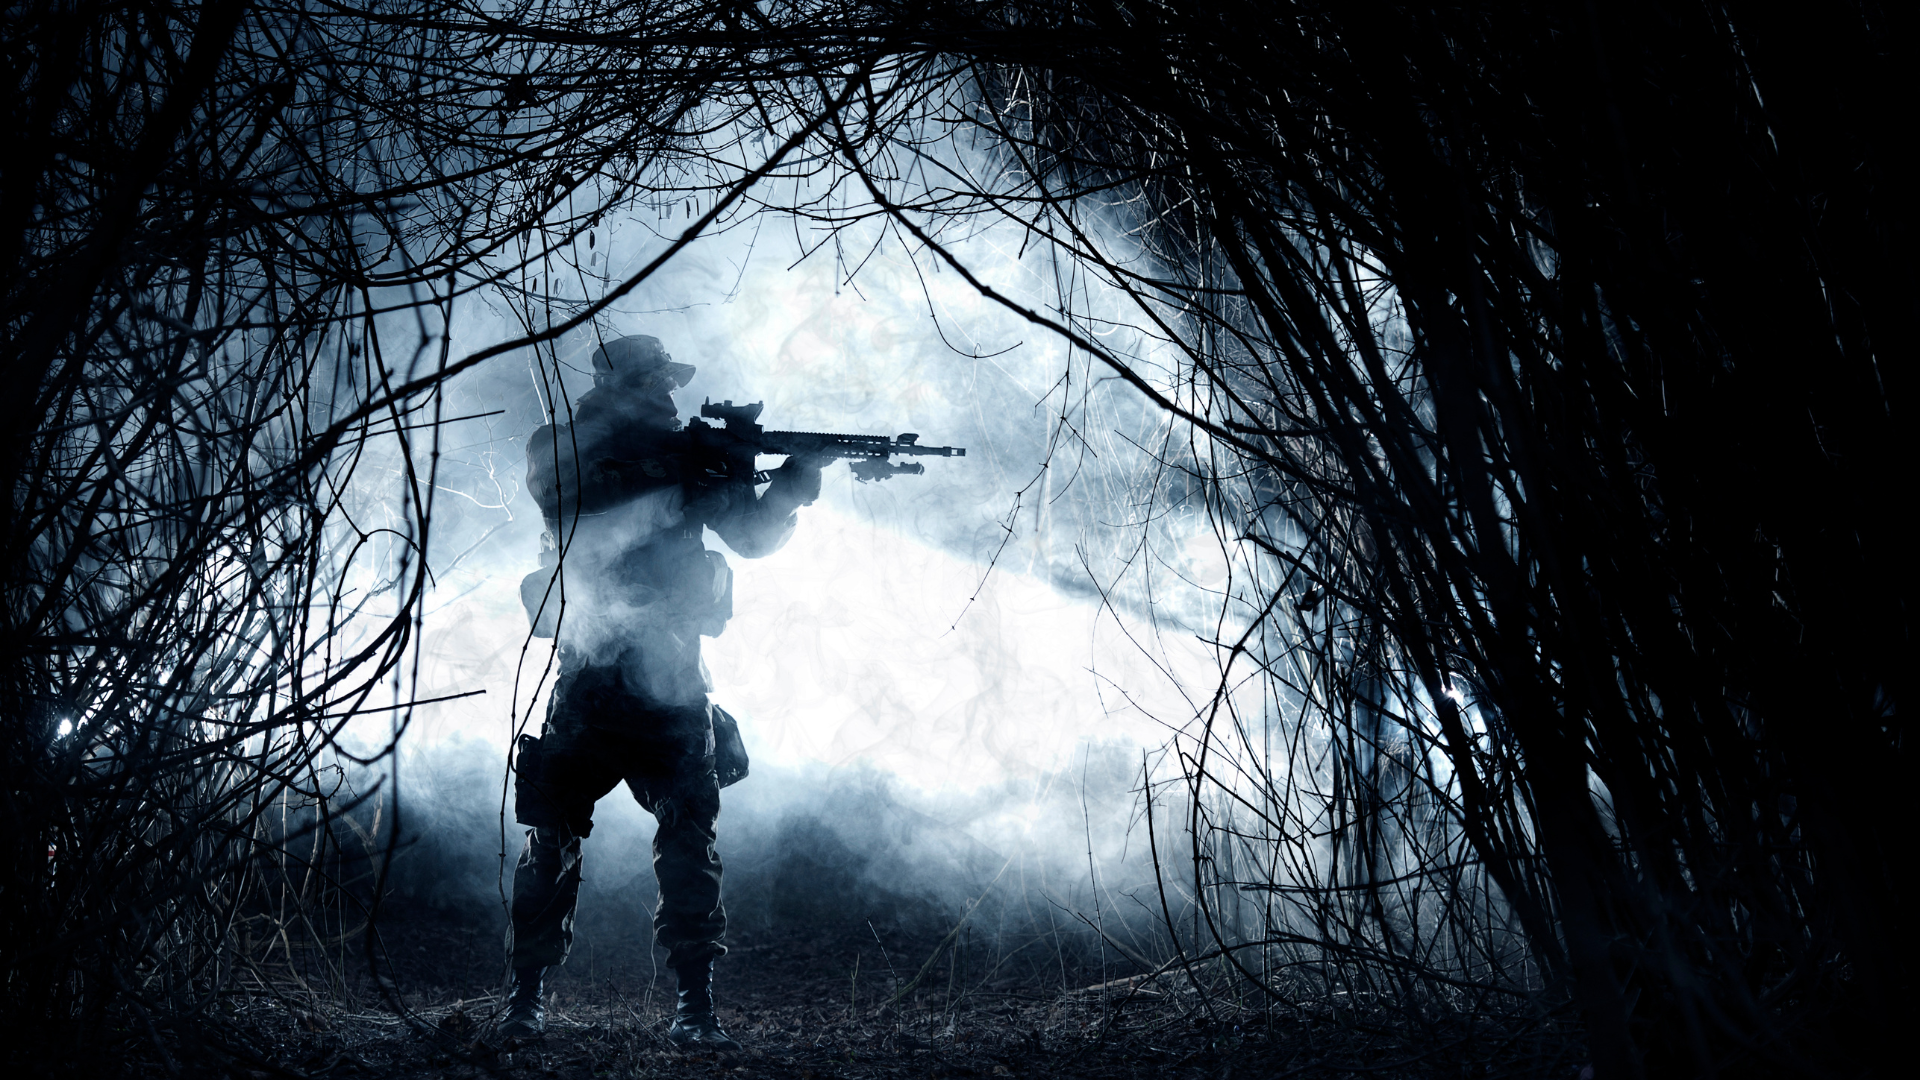 soldier standing at night in woods with weapon